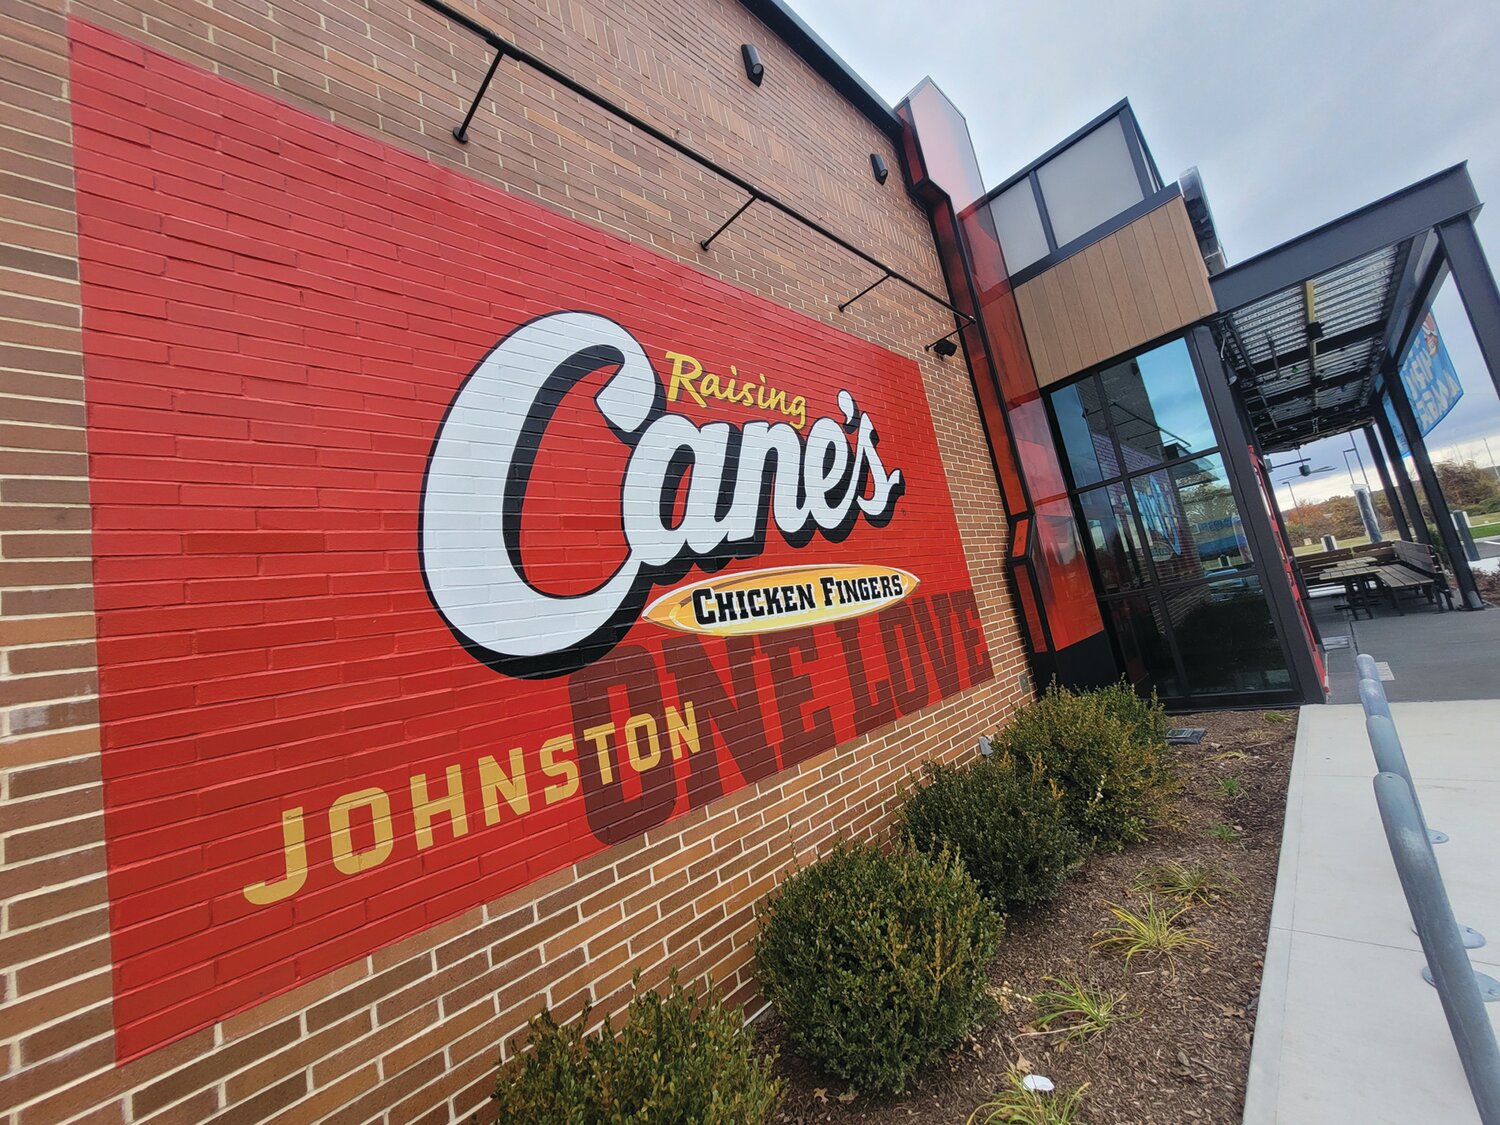 WATCH OUT ABEL: Raising Canes expects to open its new Johnston location in early January 2024. They’ve promised the first 20 guests “Free Canes for a Year.”